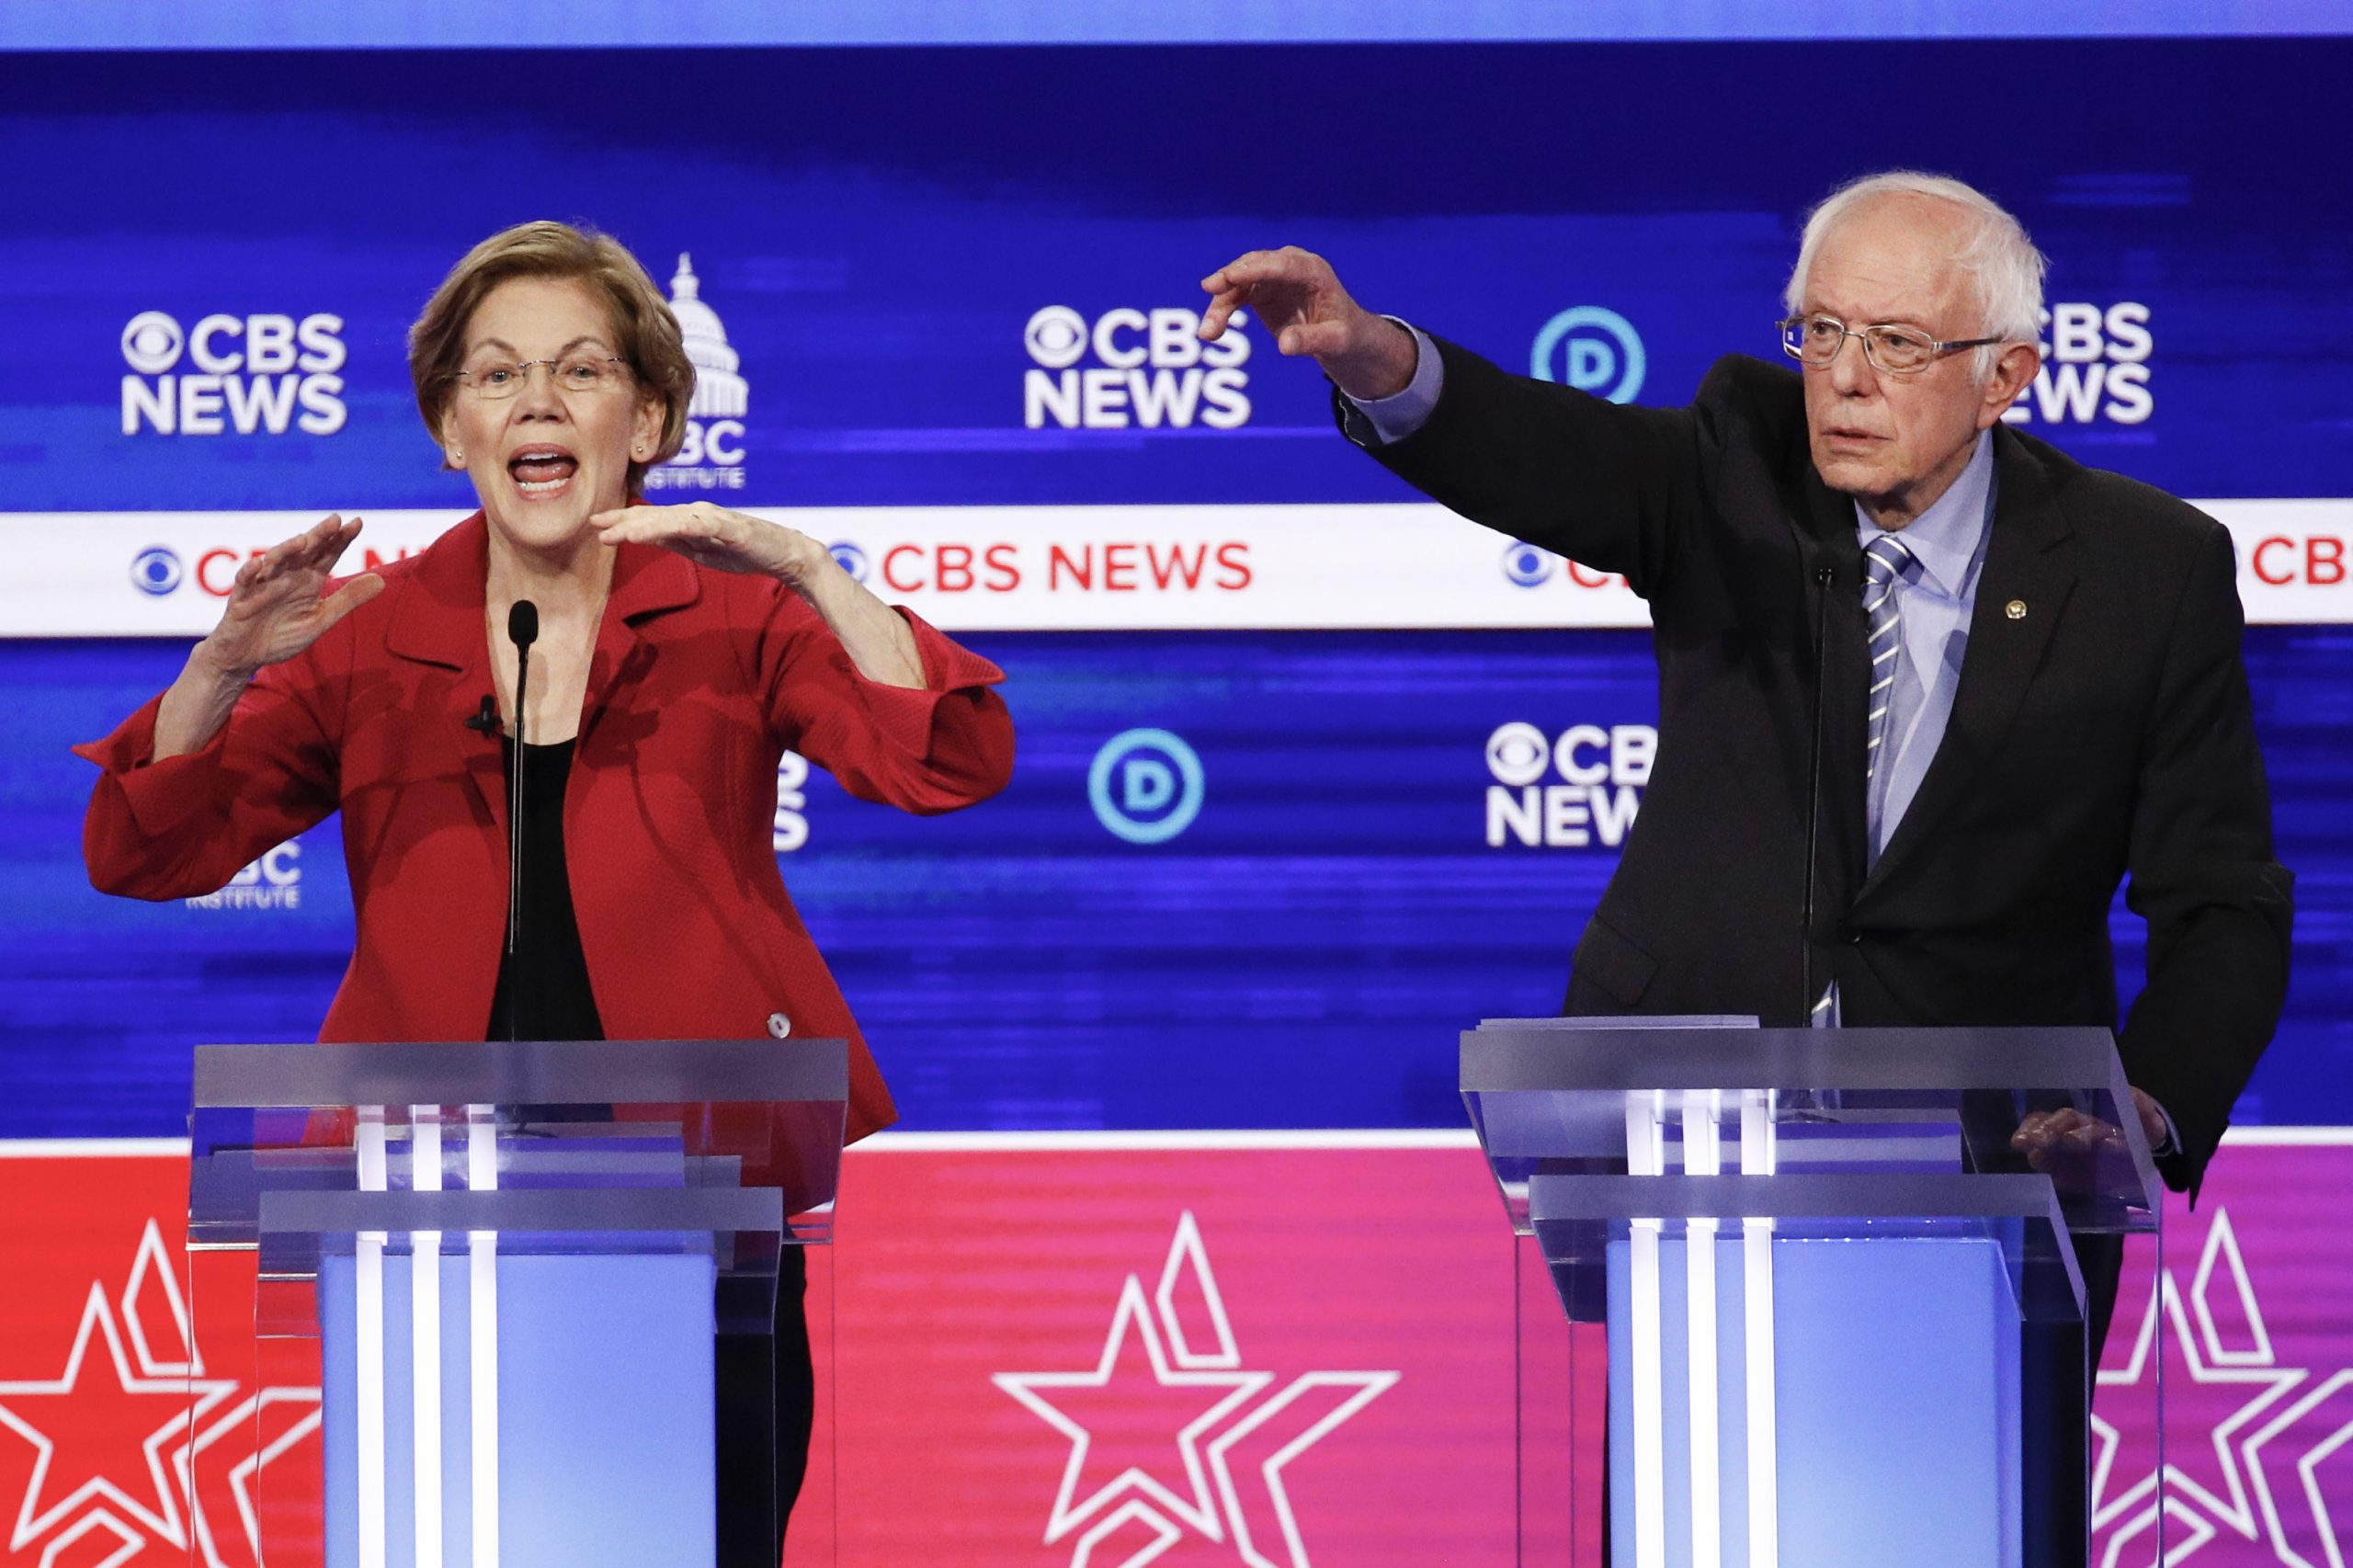 At a recent J Street conference, leaders of the Democratic Party’s progressive wing, Senators Elizabeth Warren and Bernie Sanders, advocated limits on U.S. aid to Israel to prevent use of such funds in the “occupied territories” that would infringe on “Palestinian rights.”